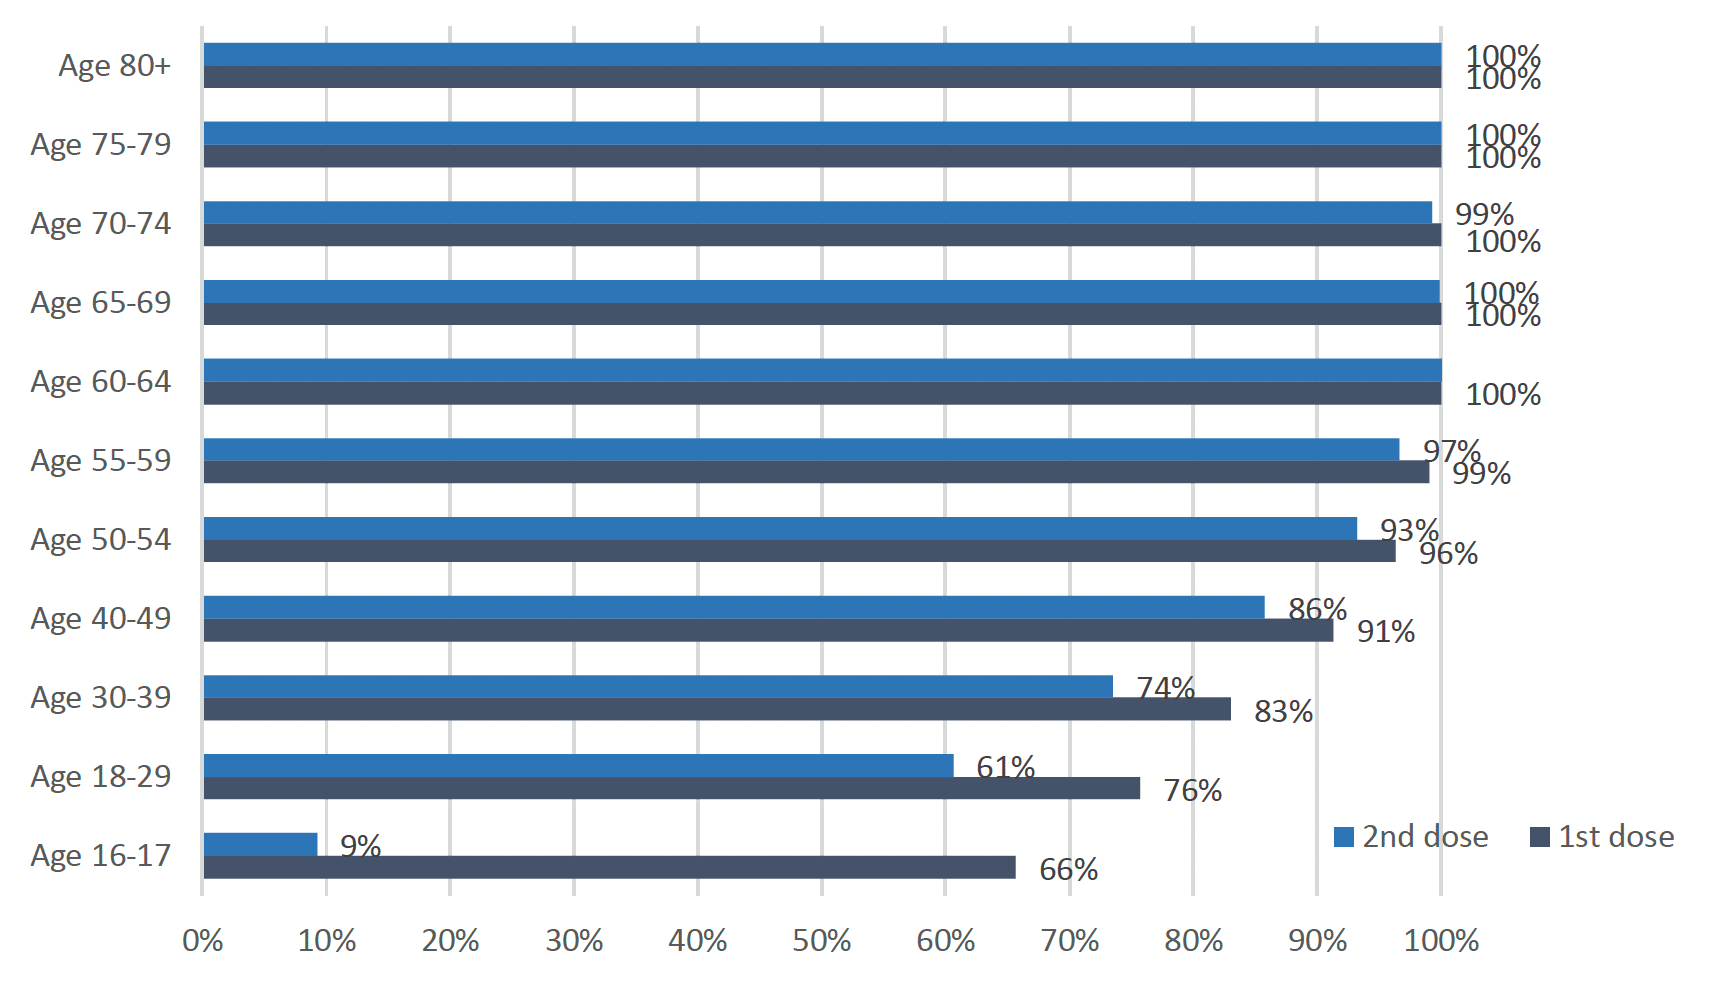 This bar chart shows the percentage of people that have received their first and second dose of the Covid vaccine so far, for 11 age groups. The six groups aged over 55 have more than 99% of people vaccinated with the first dose and more than 96% of people vaccinated with the second dose. Of those aged 50-54, 96% have received their first dose and 93% have received their second dose. Younger age groups have lower percentages vaccinated, with 91% of 40-49 year olds having received their first dose and 86% the second dose, 83% of the 30-39 year olds having received their first and 74% having received their second dose, 76% of 18 to 29 year olds having received the first dose and 61% having received the second dose, and 66% of the 16-17 year olds having received their first dose and 9% their second dose of the vaccine.